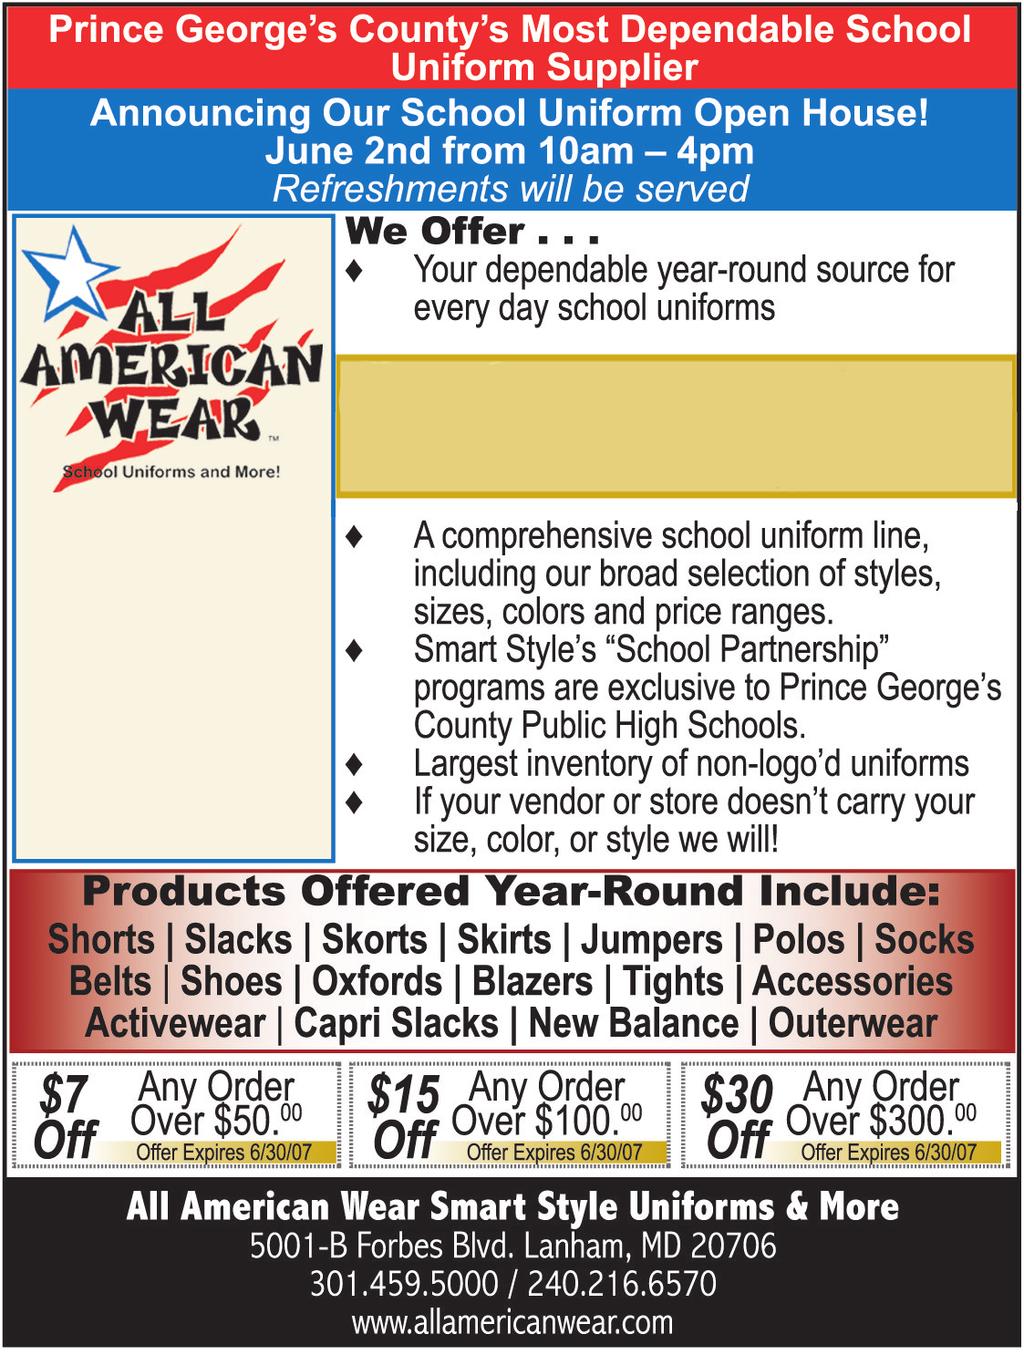 SCHOOL UNIFORM $10.00 off $20.00 off over $75.00 over $135.00 $35.00 off $55.00 off Performance Guarantee over $235.